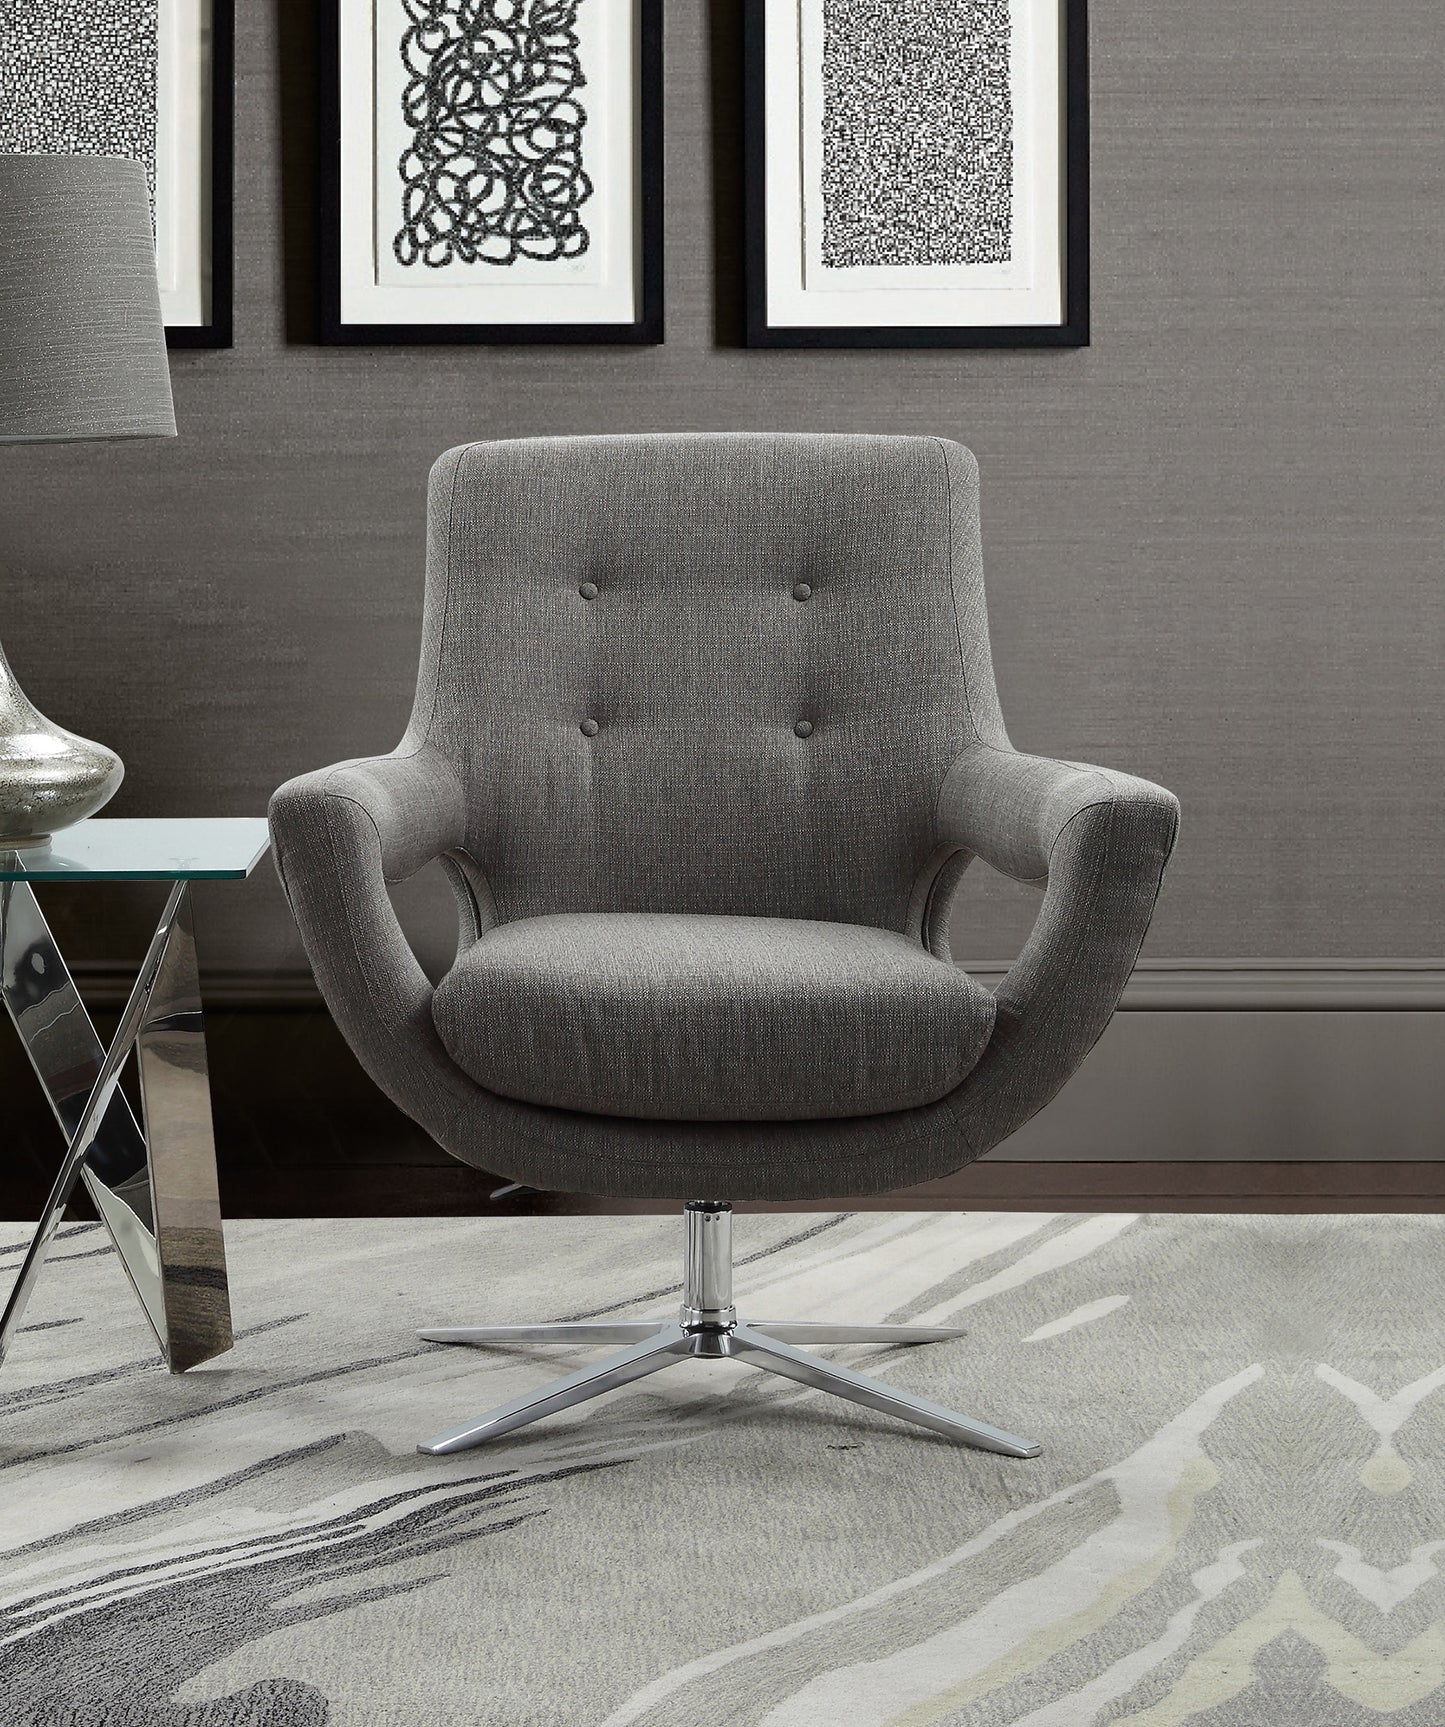 Quinn Contemporary Adjustable Swivel Accent Chair in Polished Chrome Finish with Gray Fabric